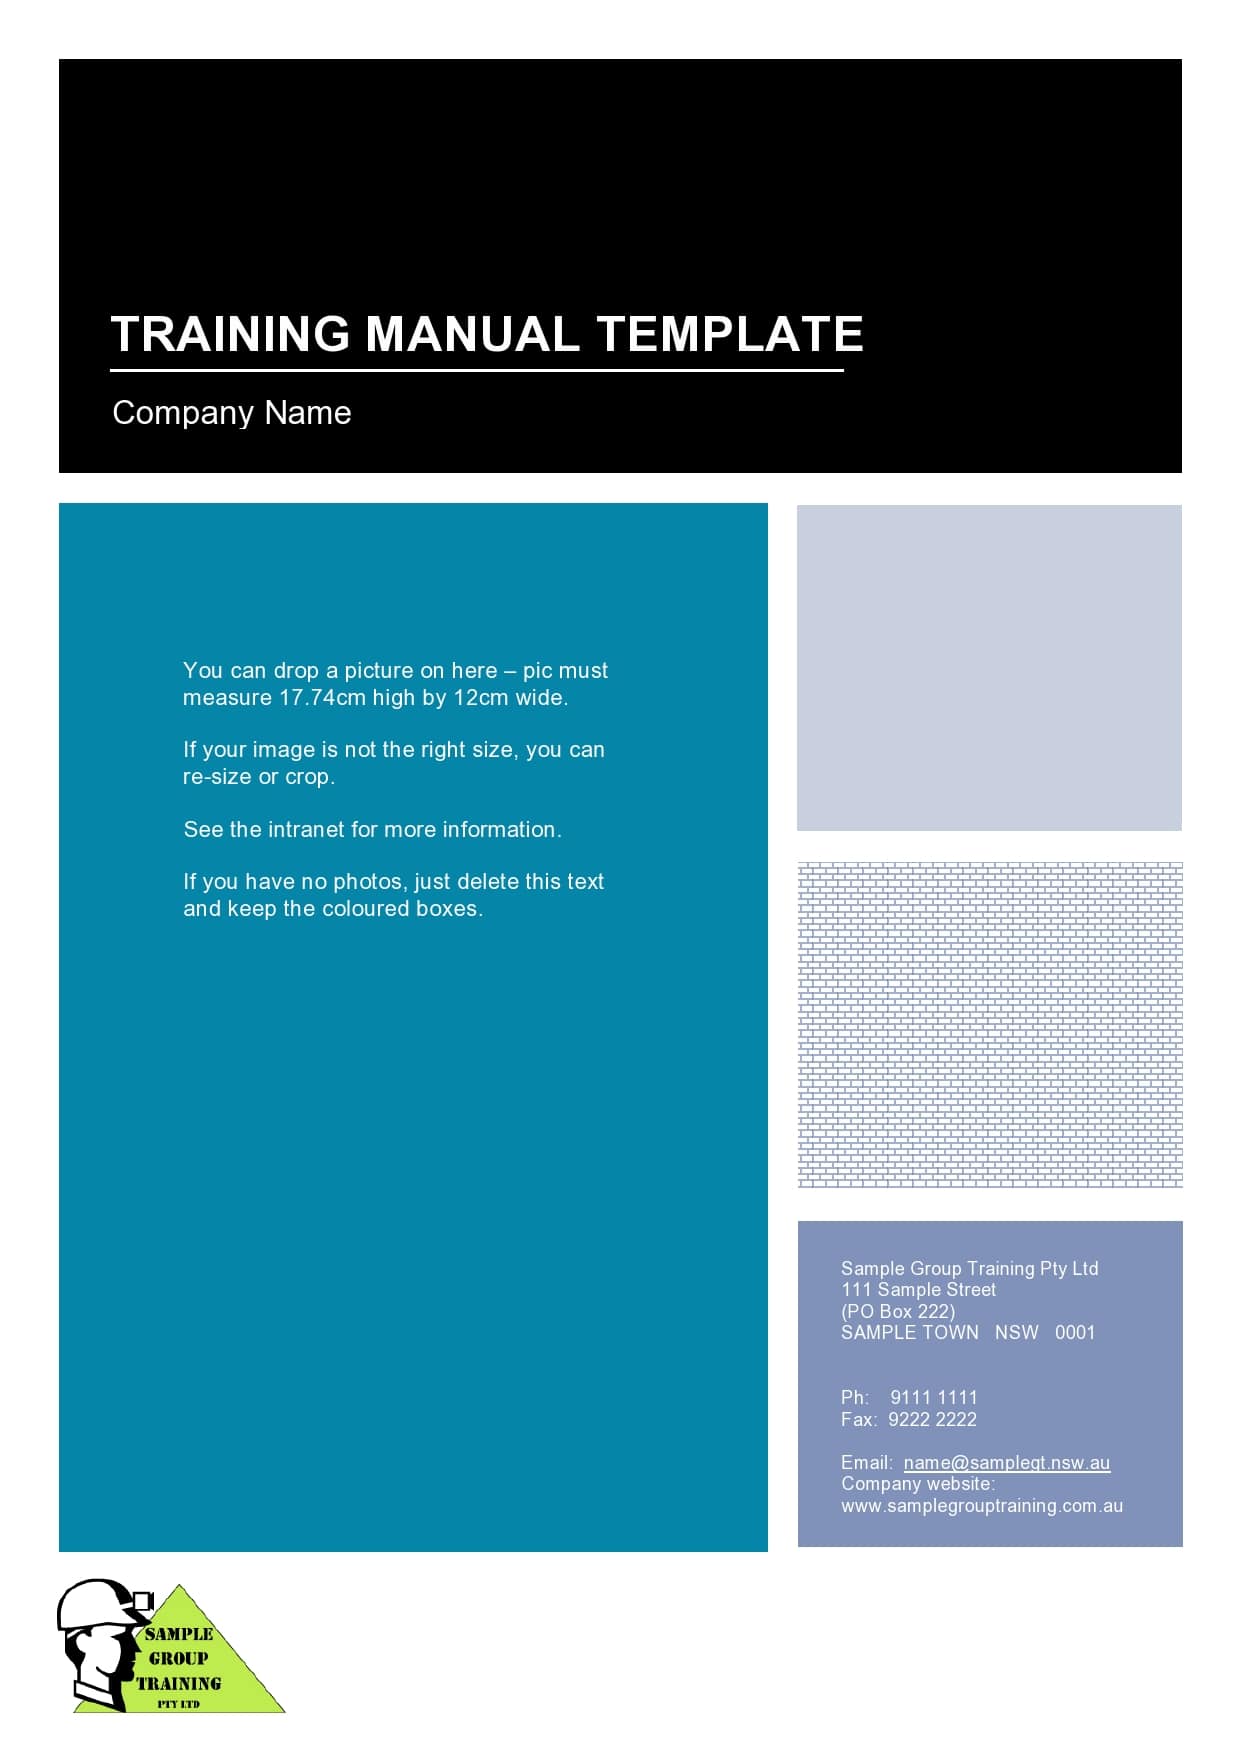 23 Best Training Manual Templates (+Examples) - TemplateArchive Regarding Training Manual Template Microsoft Word